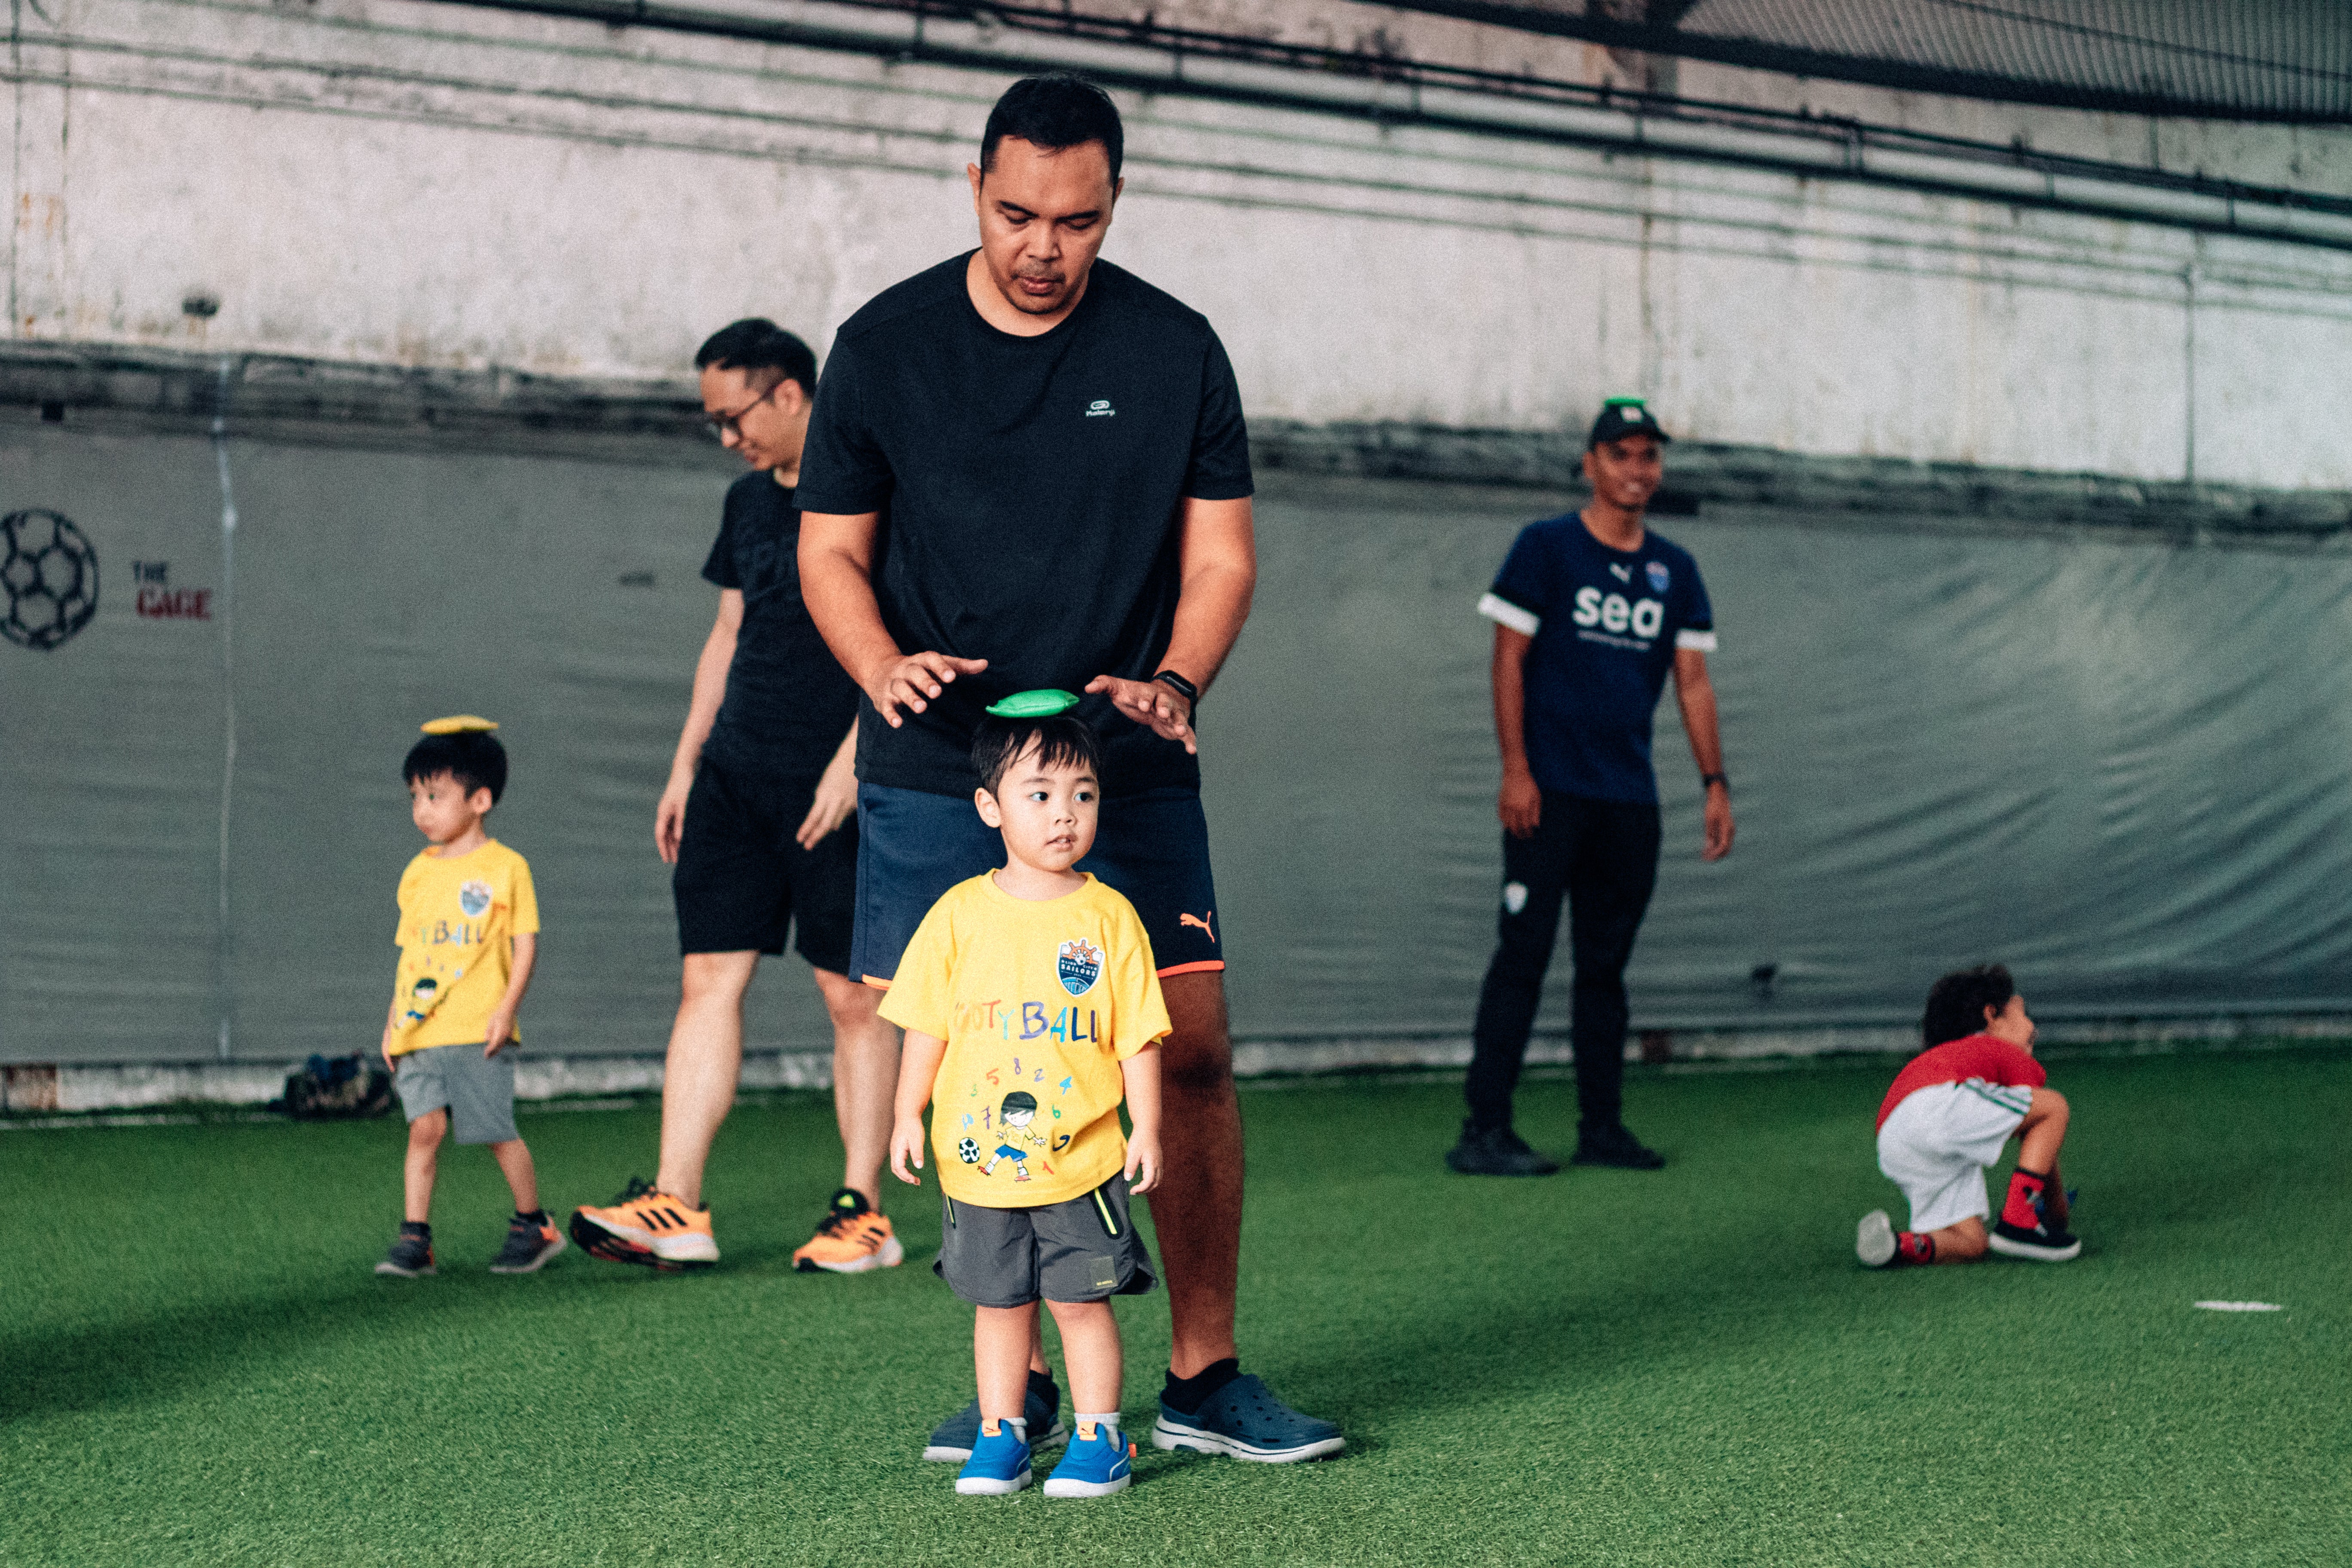 2 Footyball Parent-Child Trial Classes for only $10